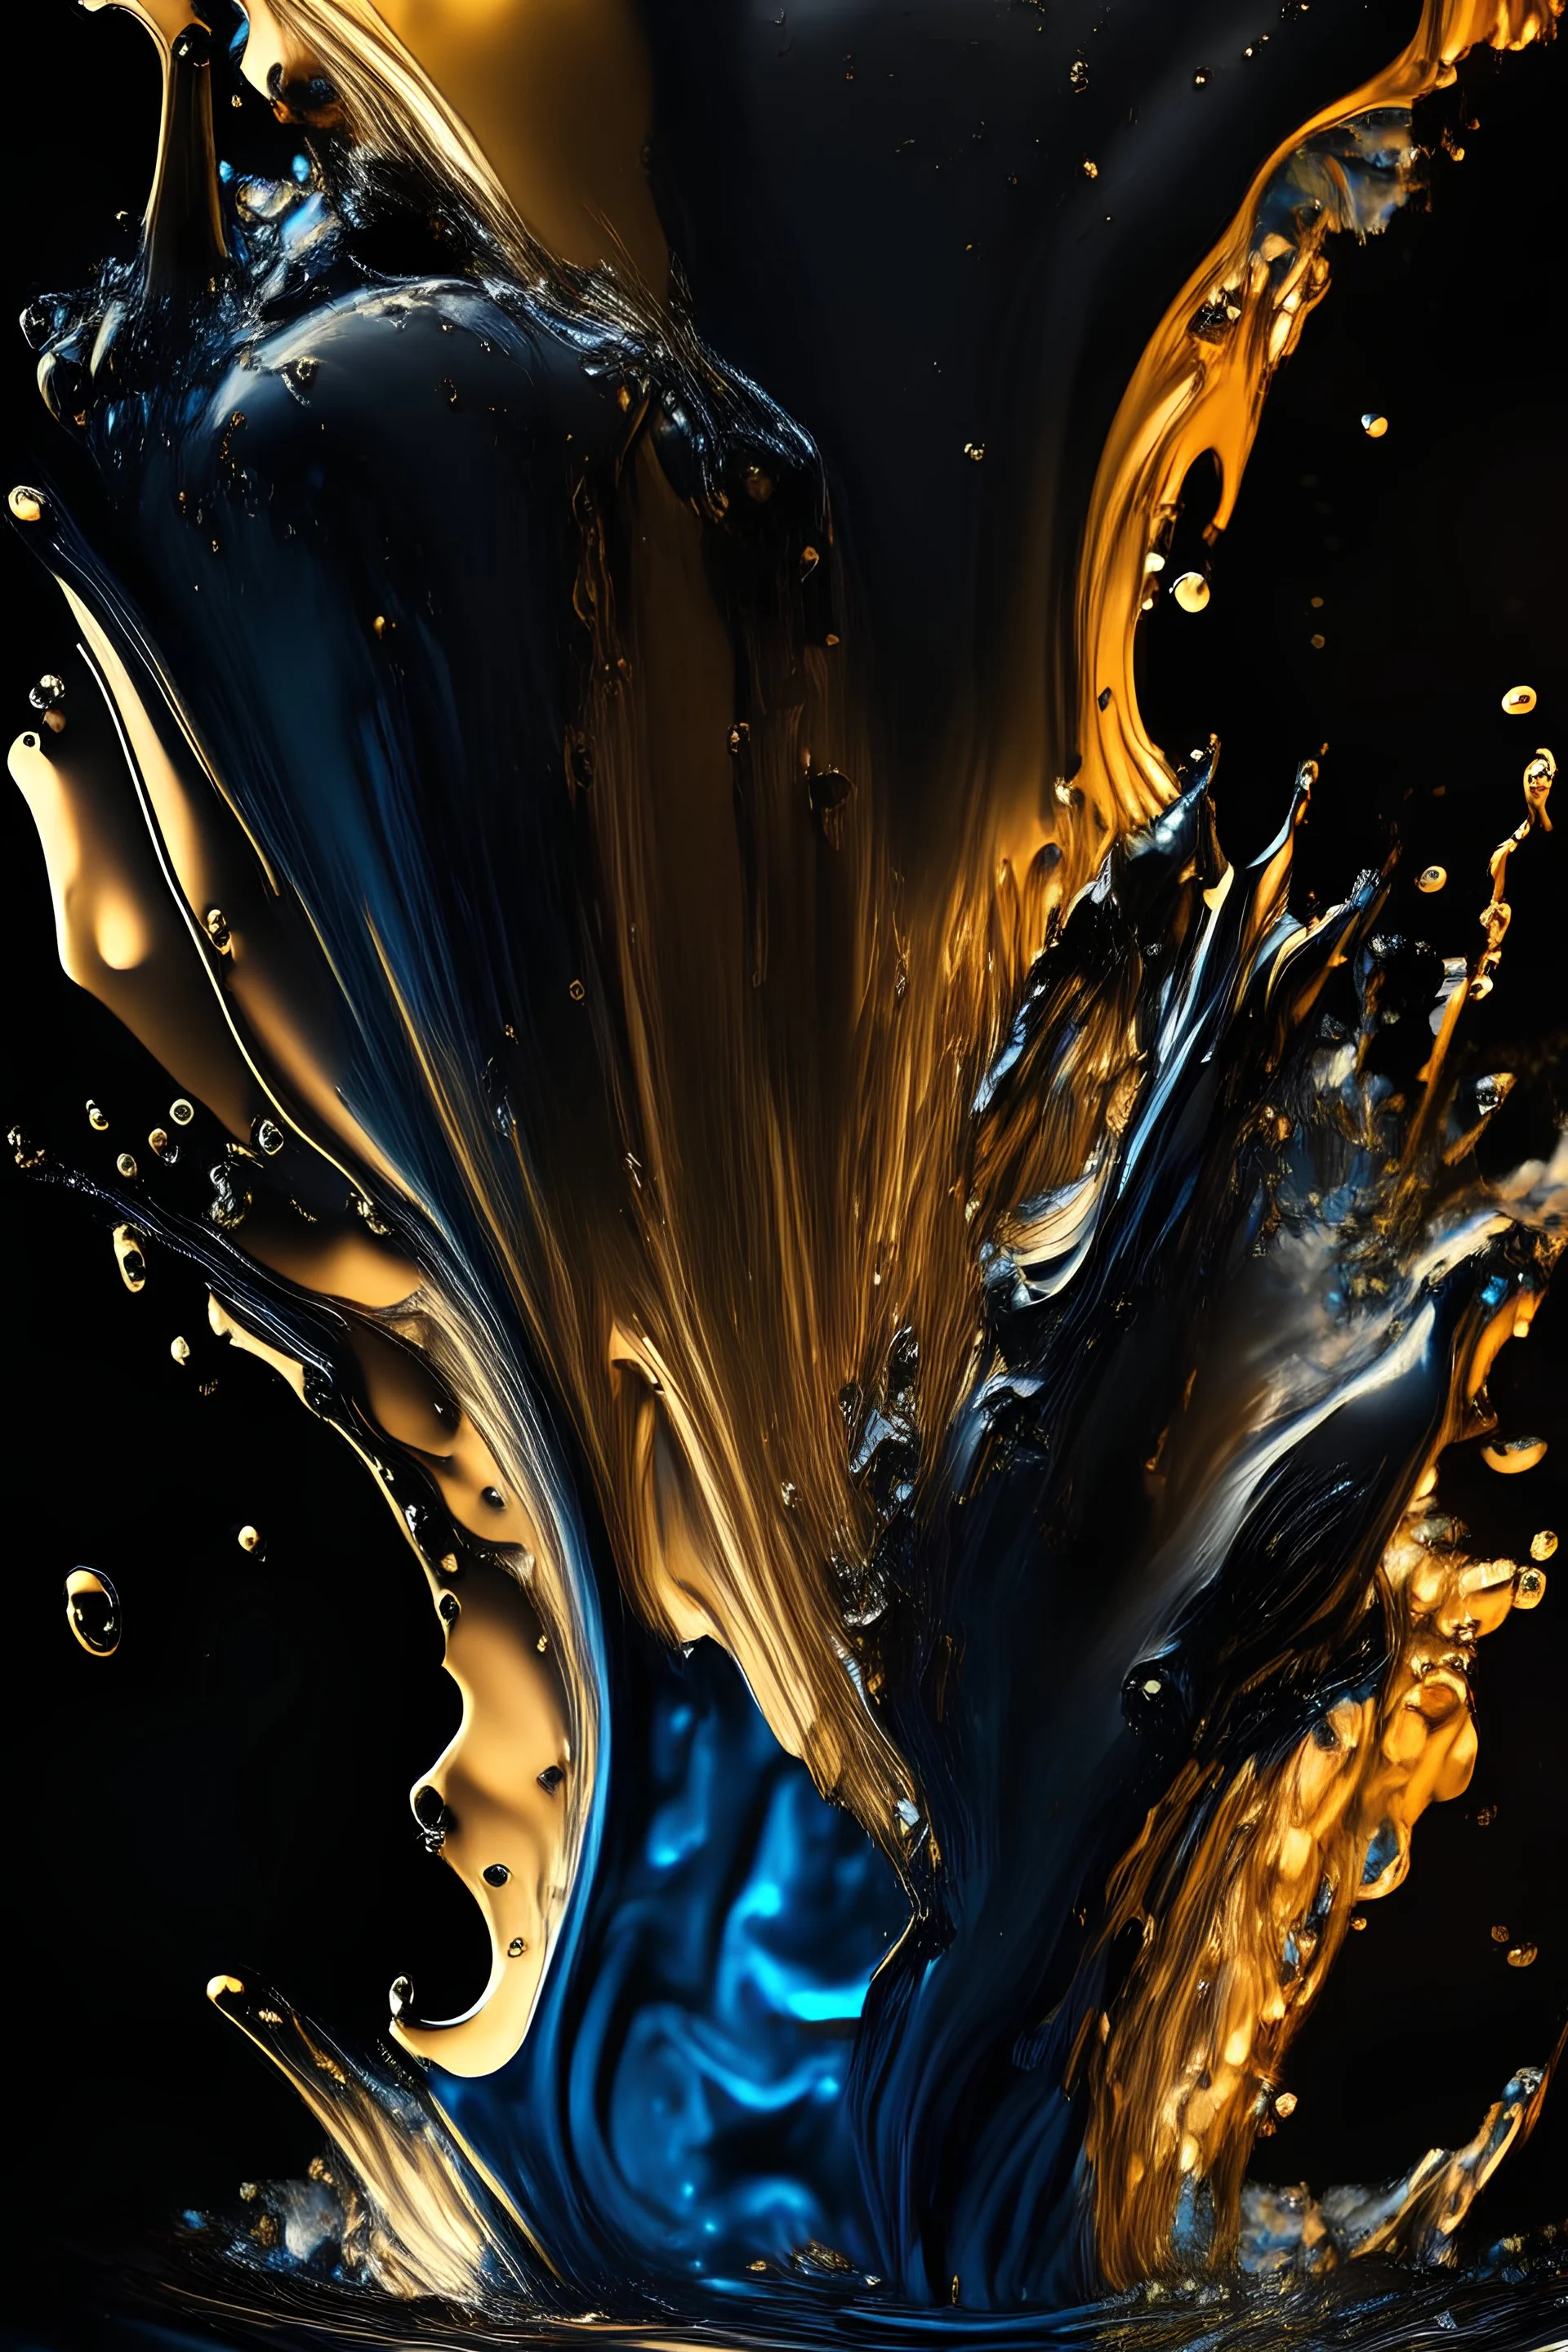 Finland. Ultra-detailed Artwork, Water Splashes, Colored Splashes, Fire and Ice, Splashes, Black Ink, Melting Liquid, Dreamy, Radiant, Shimmer, Shadows, Oil On Canvas, Brush Strokes, Smooth, Ultra-high resolution, 8k, Unreal Engine 5, Ultra-sharp Focus, Complex Artistic Masterpiece, Golden Ratio, Highly Detailed, Vivid, Cinematic rendering of characters, an ultra-high-quality model